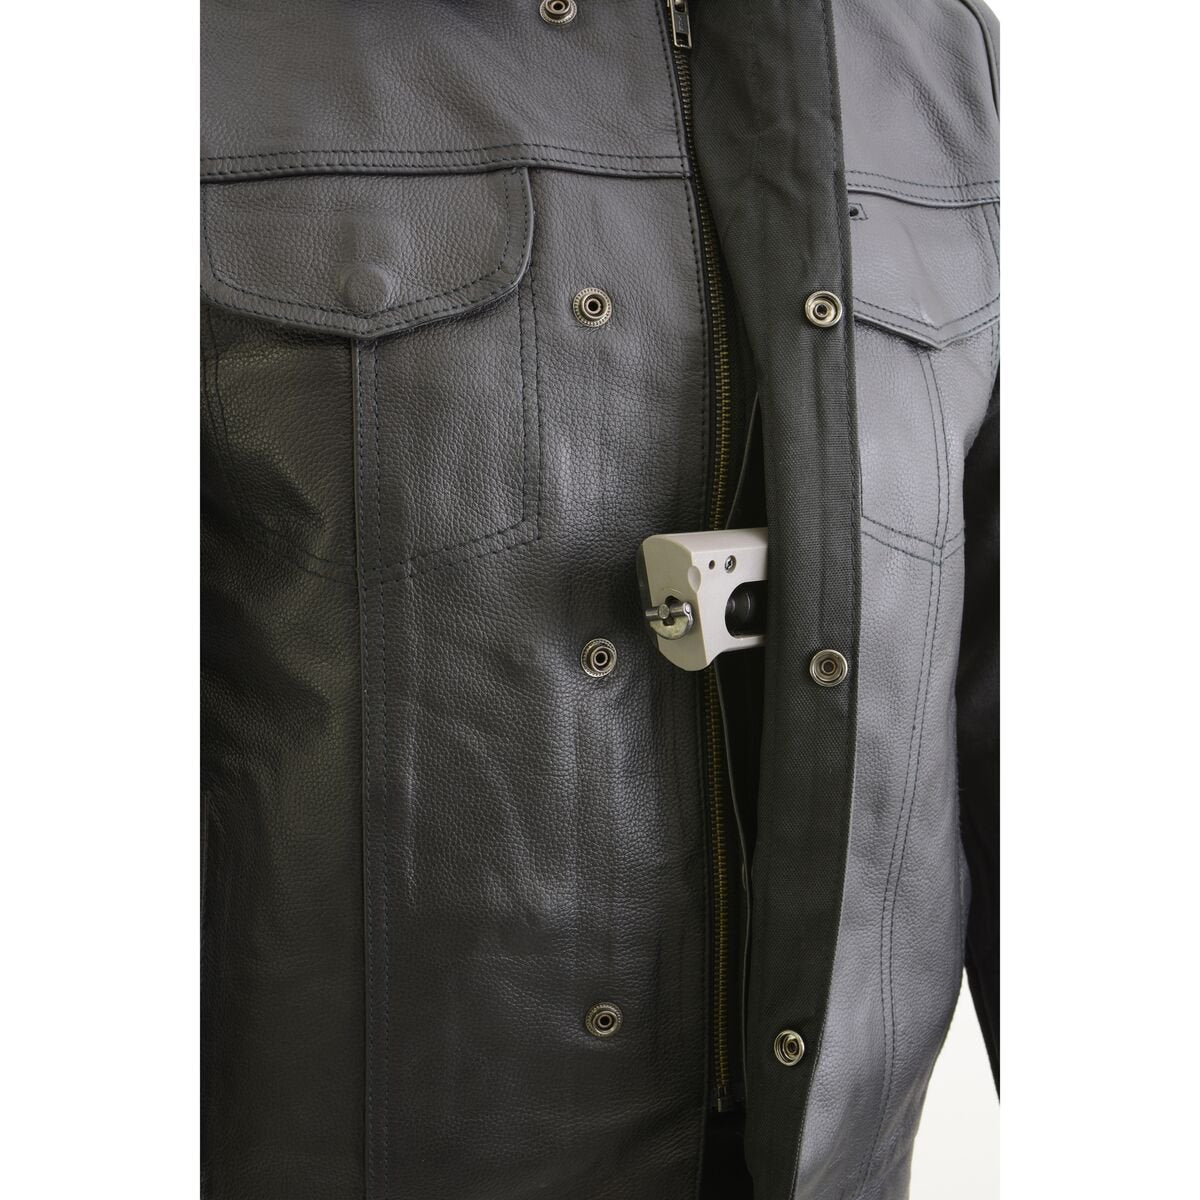 Milwaukee Leather LKM3714 Men's Black Club Style '2 in 1' Zipper Vest with Full Sleeve Hoodie and Quick Draw Pocket